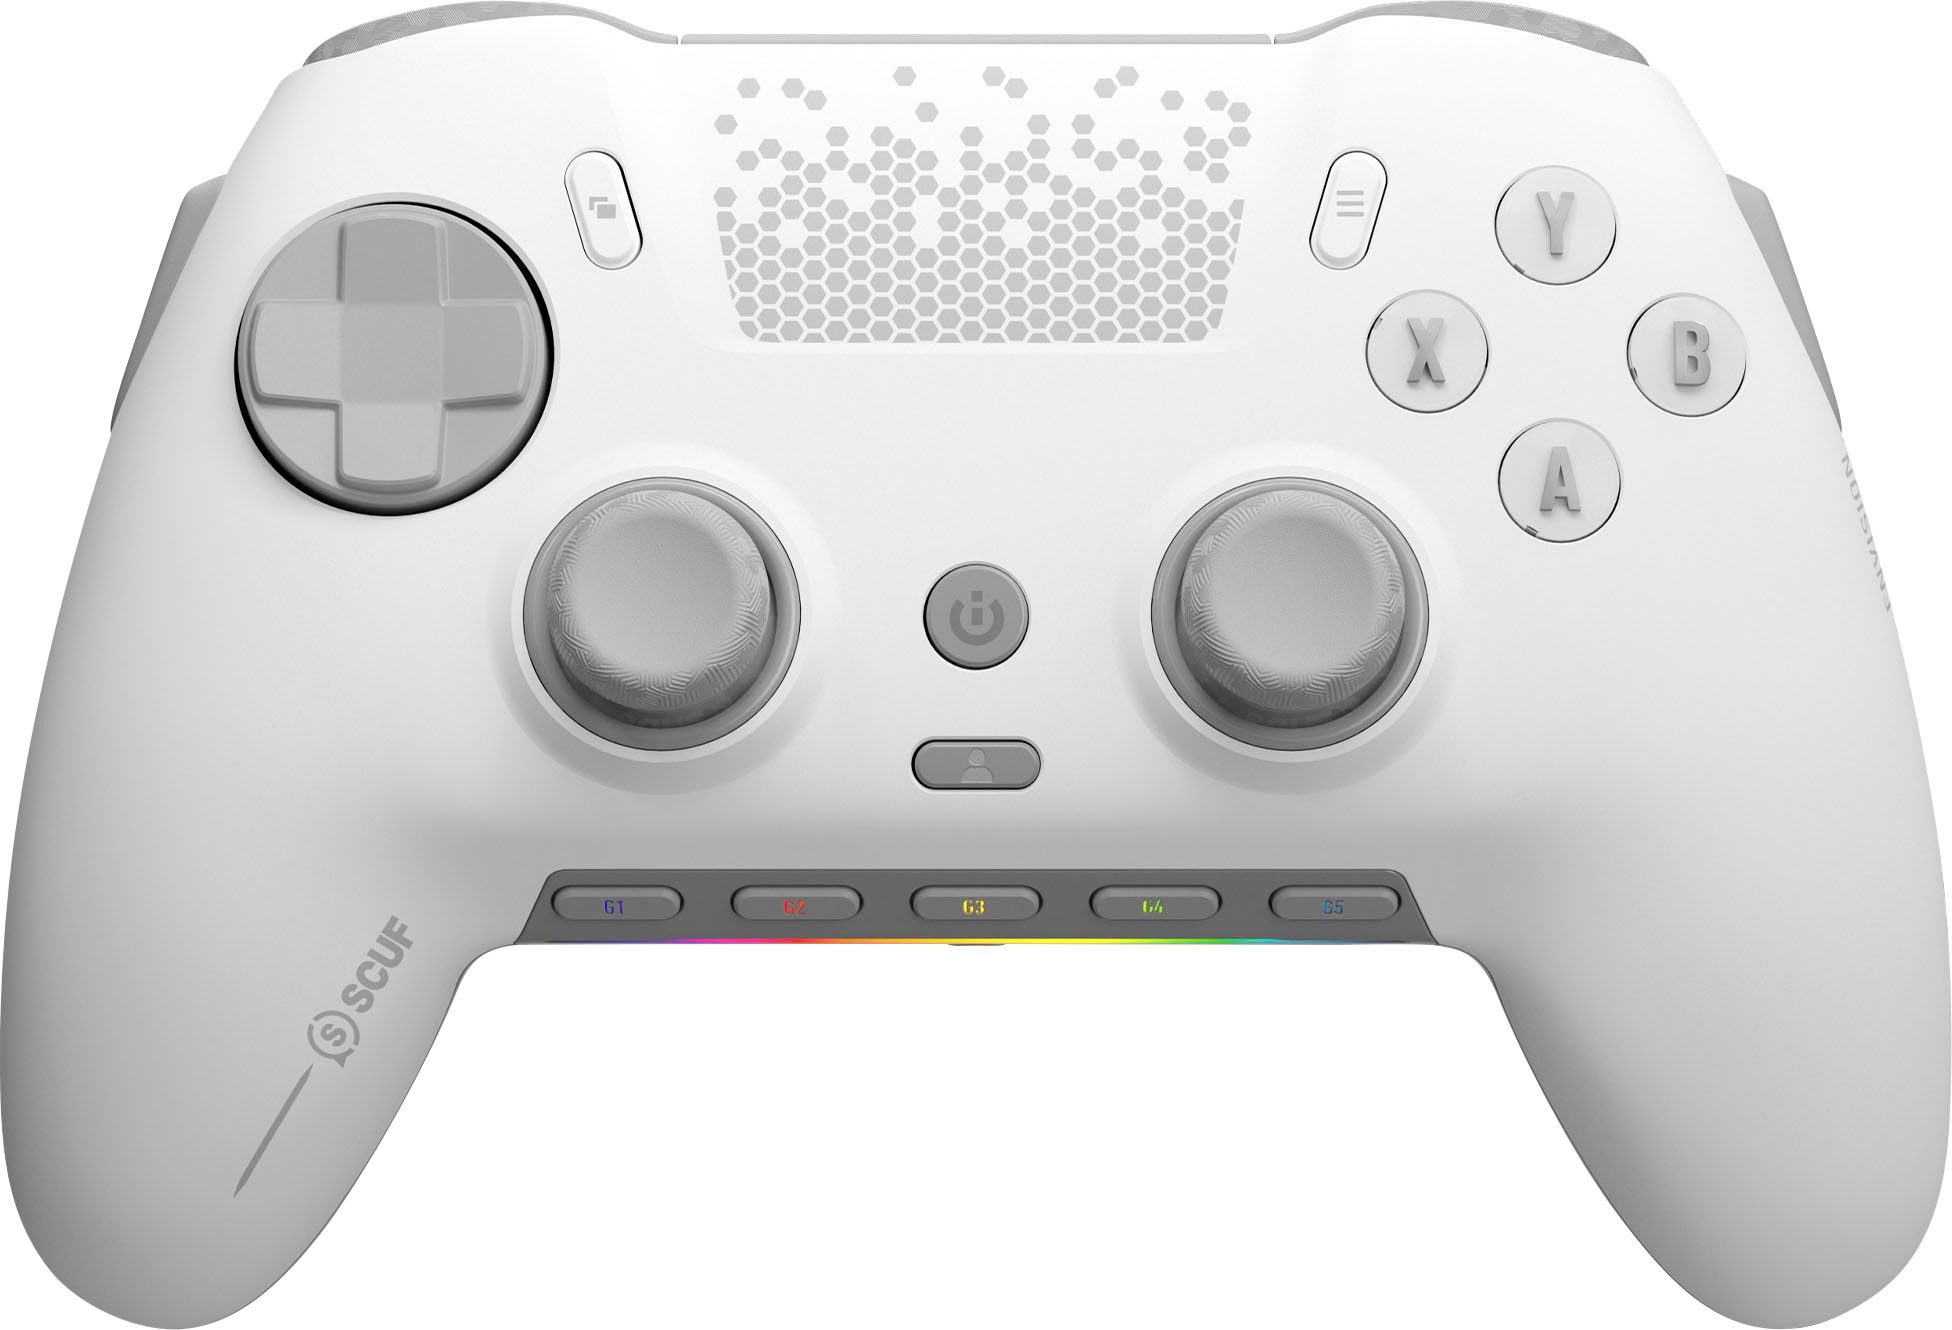 Scuf's Instinct controller gives pro gamers even more choice on